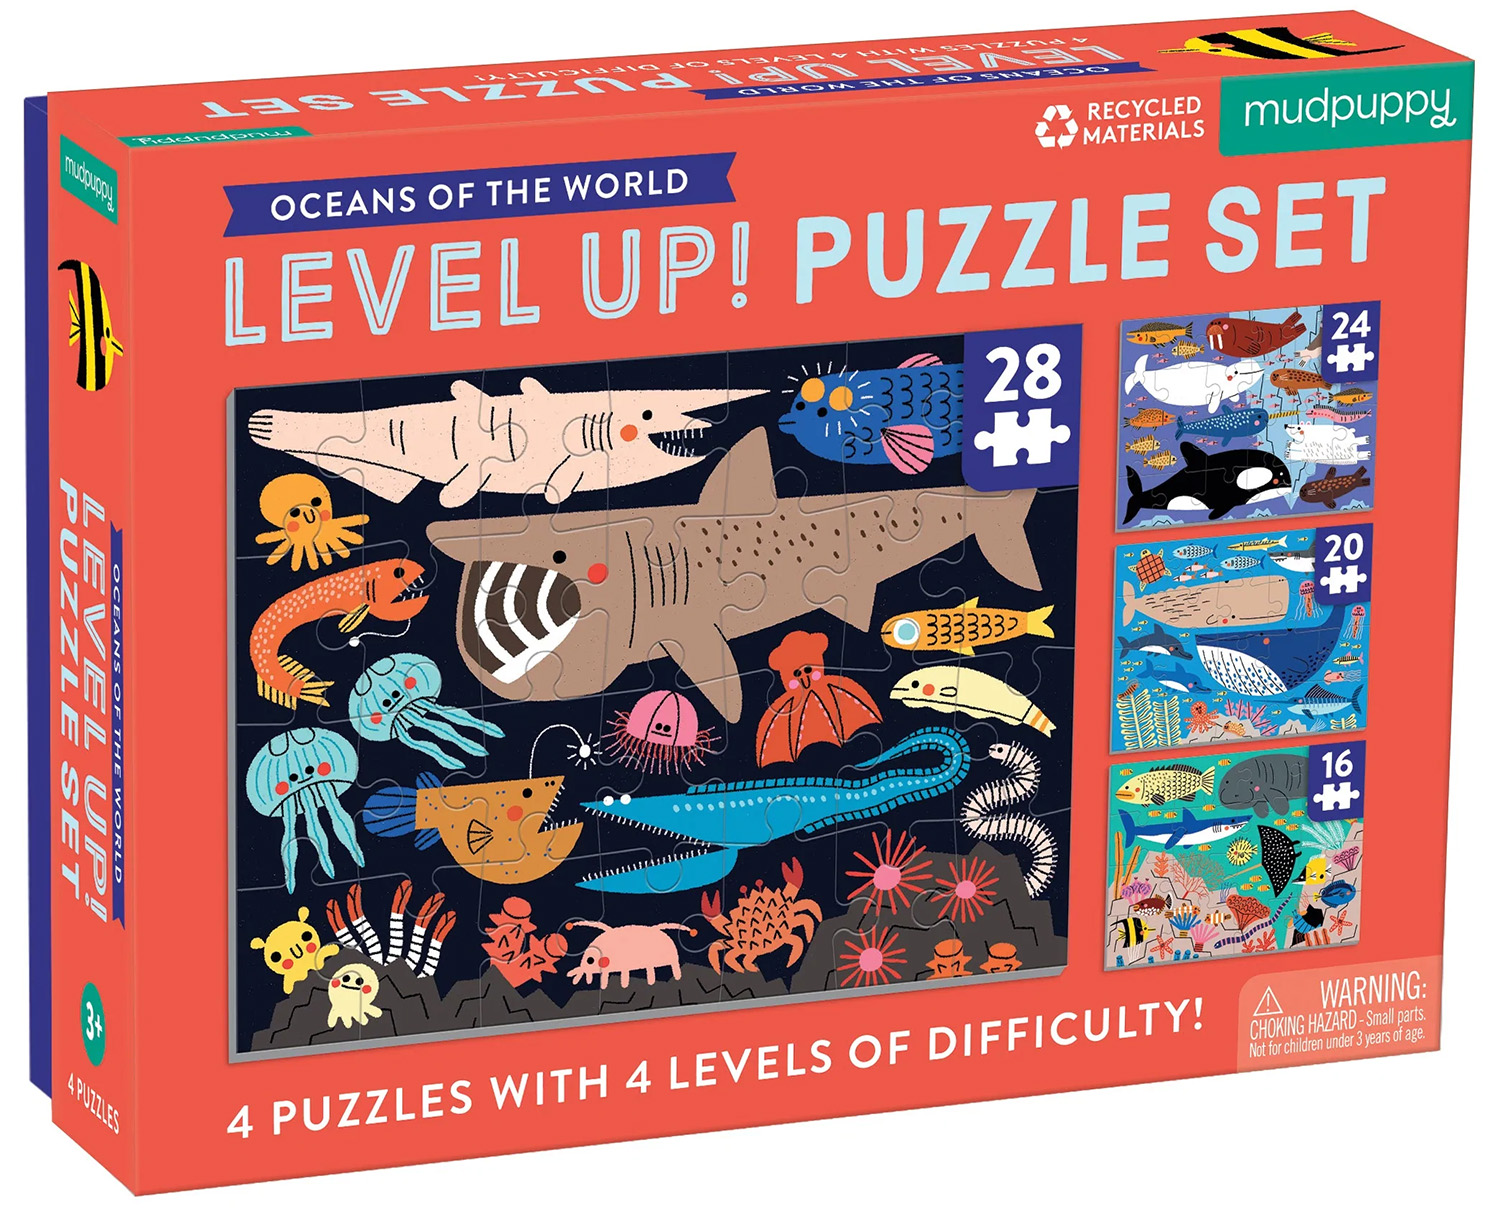 Oceans of the World Level Up! Puzzle Multipack